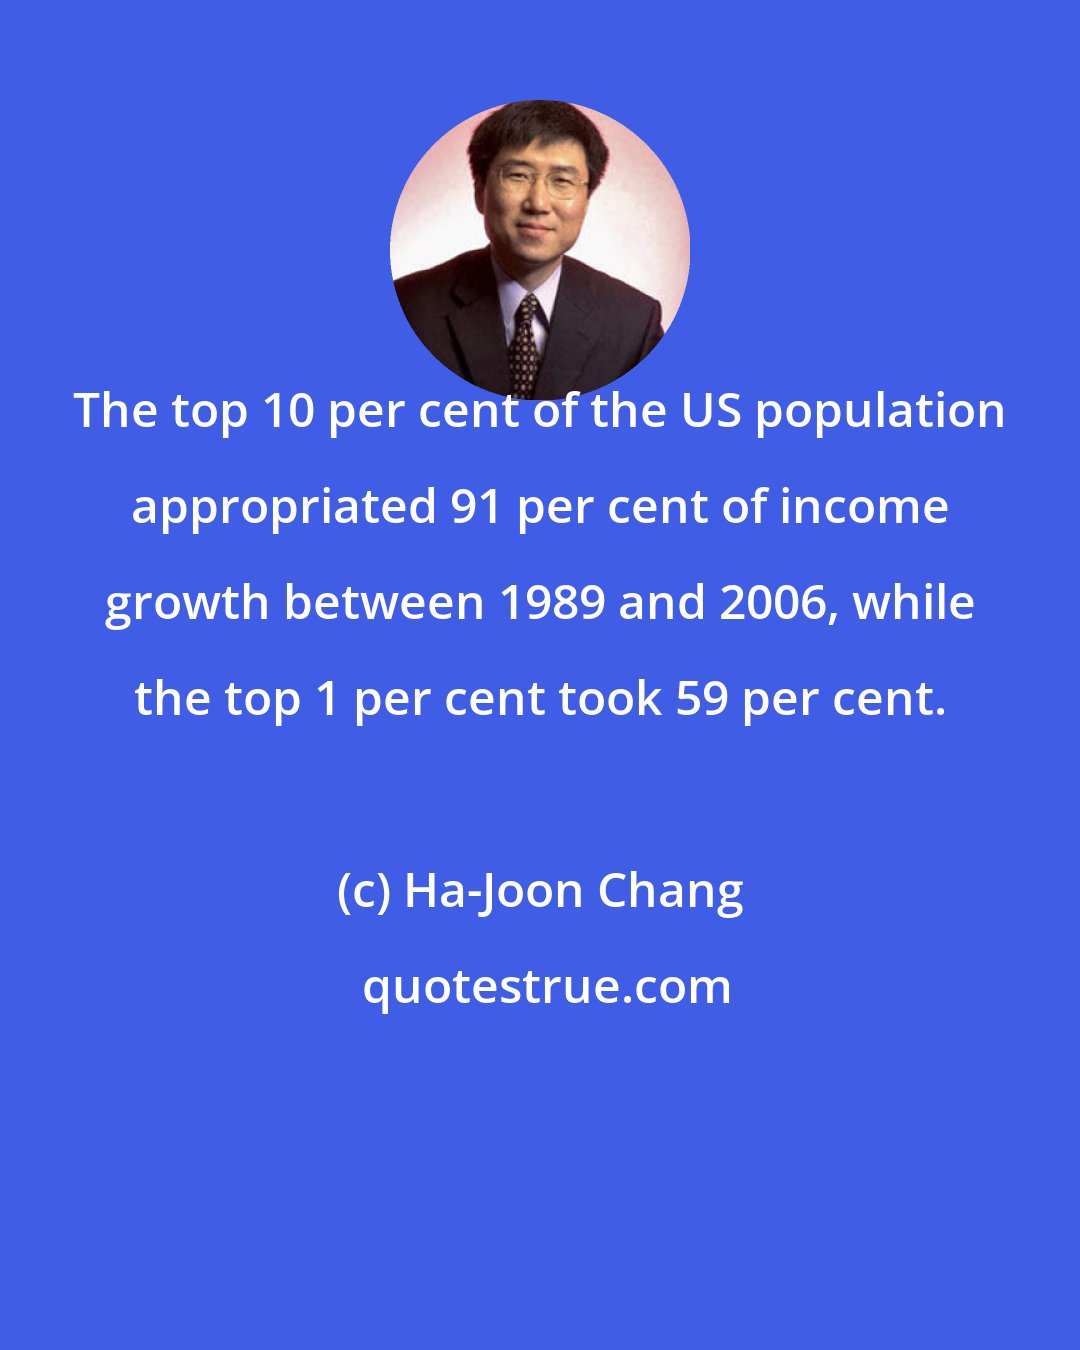 Ha-Joon Chang: The top 10 per cent of the US population appropriated 91 per cent of income growth between 1989 and 2006, while the top 1 per cent took 59 per cent.